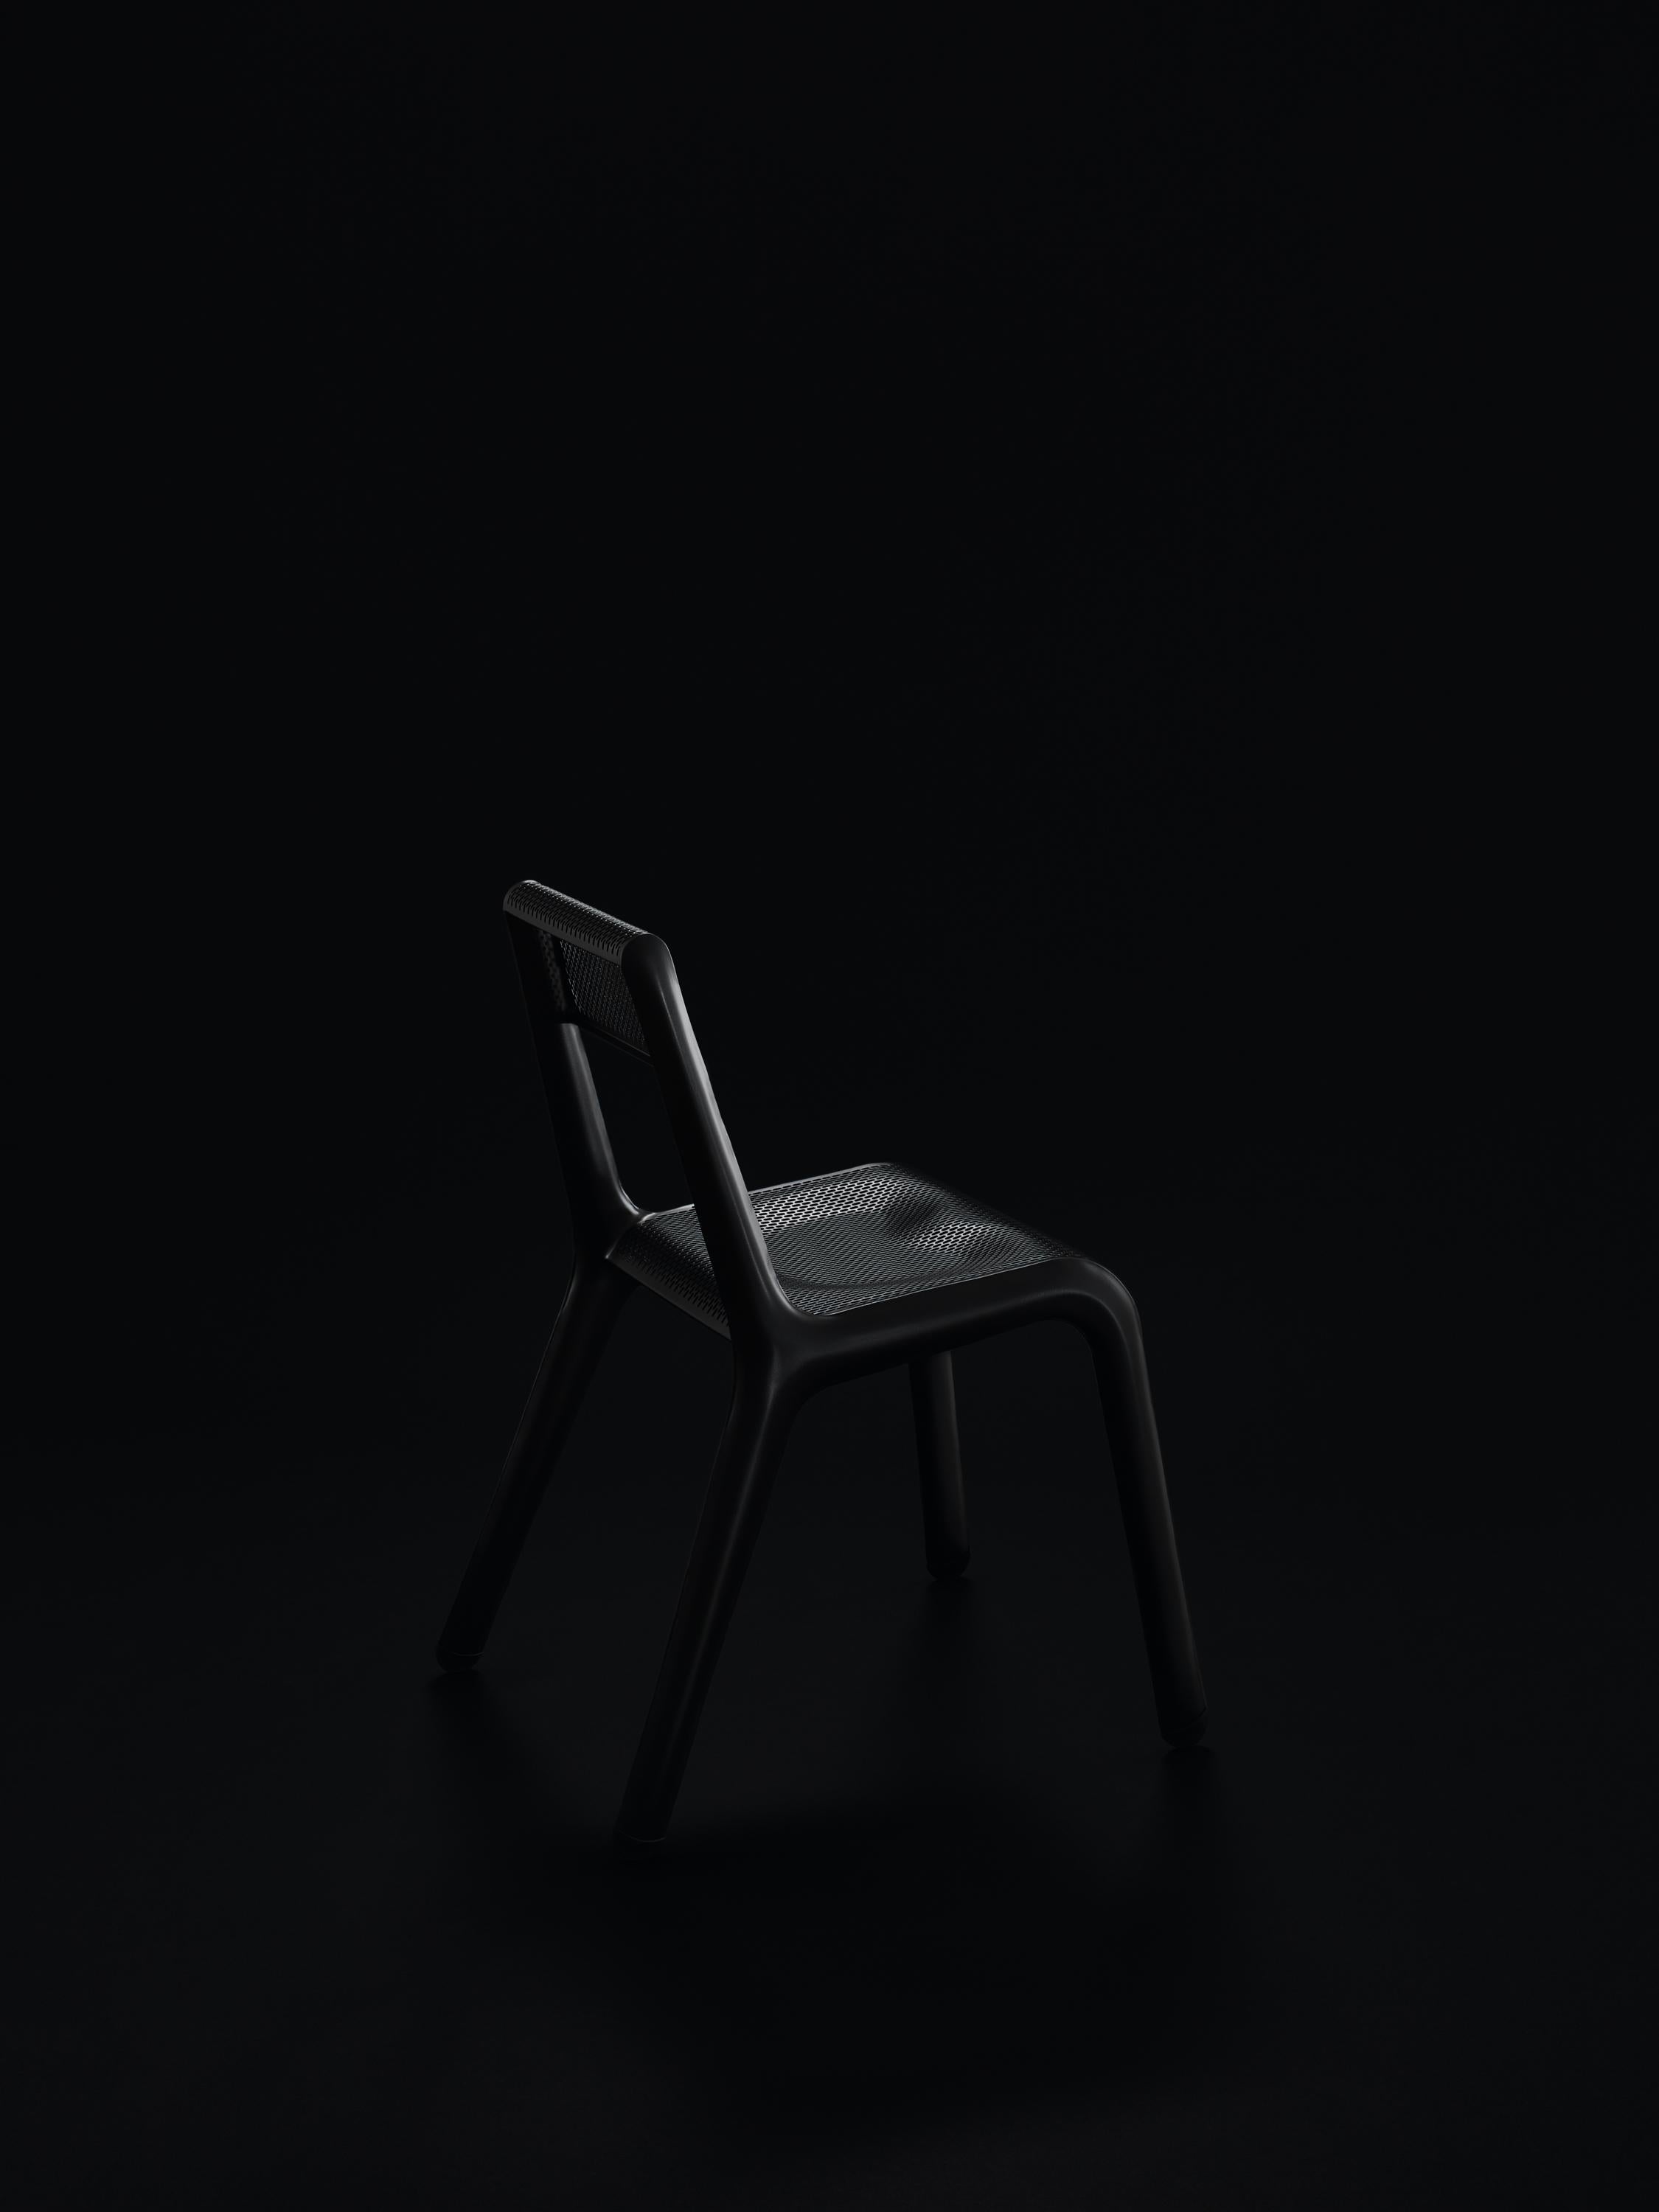 Black Anodic Ultraleggera chair by Zieta
Dimensions: D 58 x W 49 x H 78 cm 
Material: Aluminum. 
Finish: Powder-coated.
Available in other colors. Also available in Leggera version.


ULTRALEGGERA is a minimalist light metal chair. Thanks to its